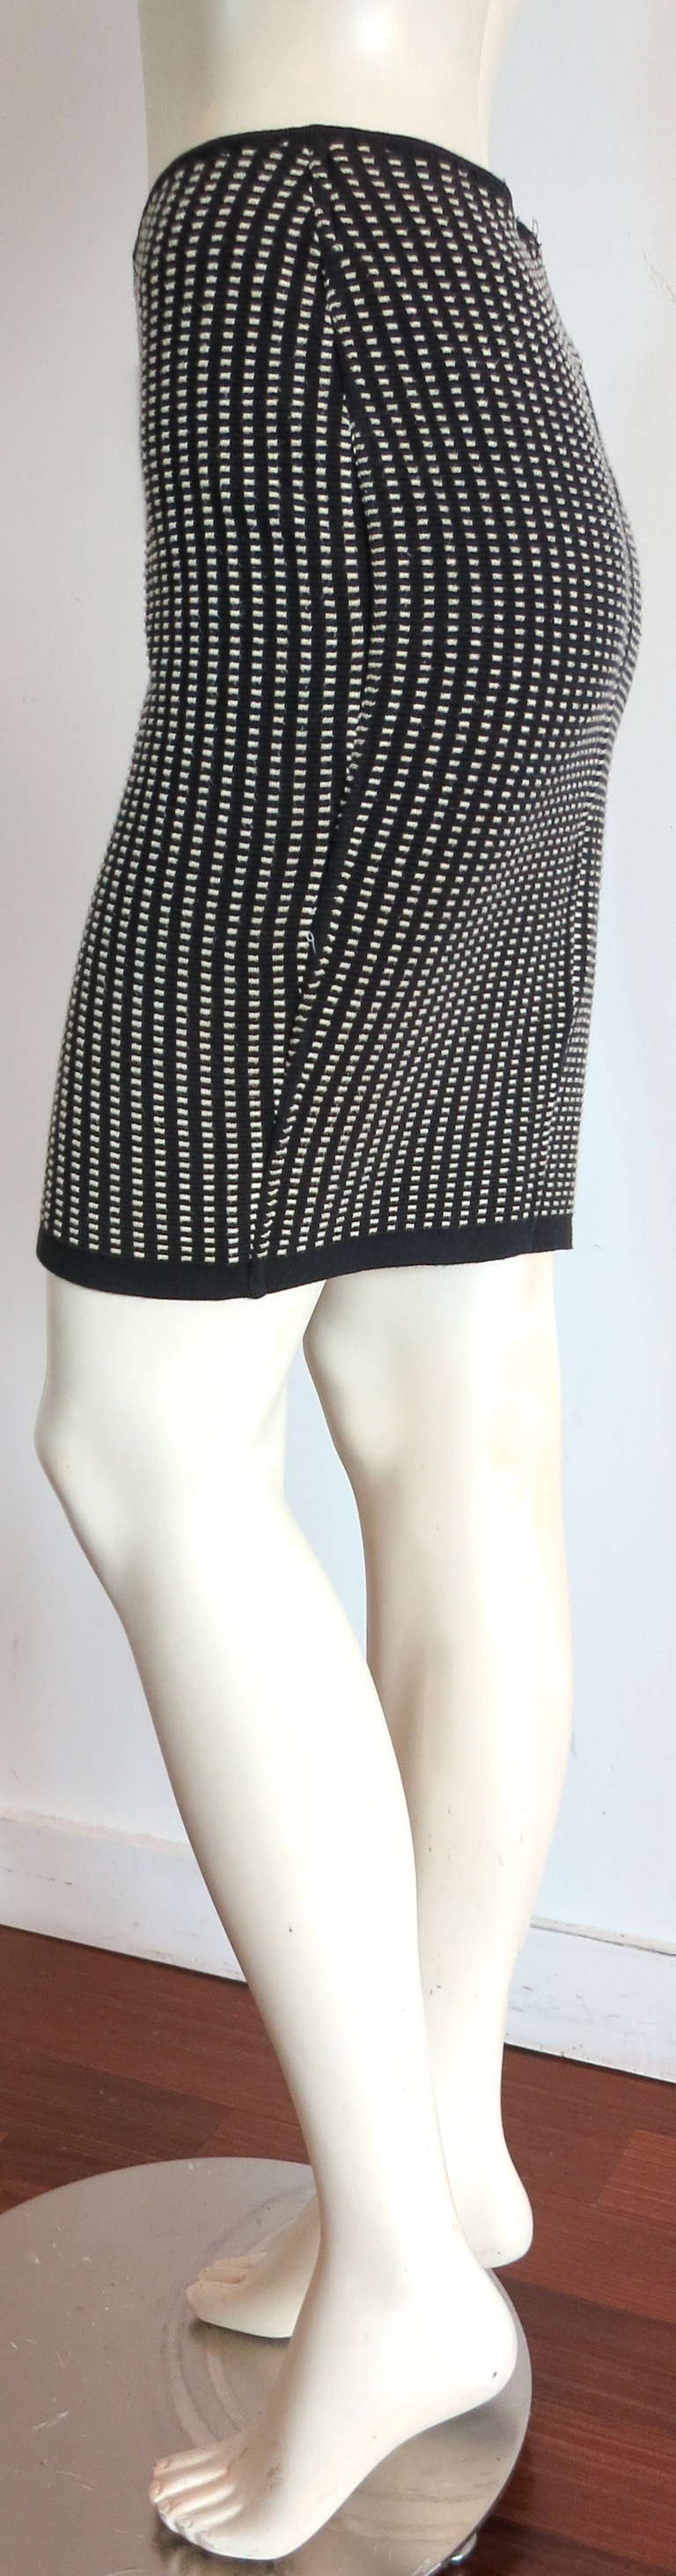 Women's 1990's ALAIA Knit skirt For Sale